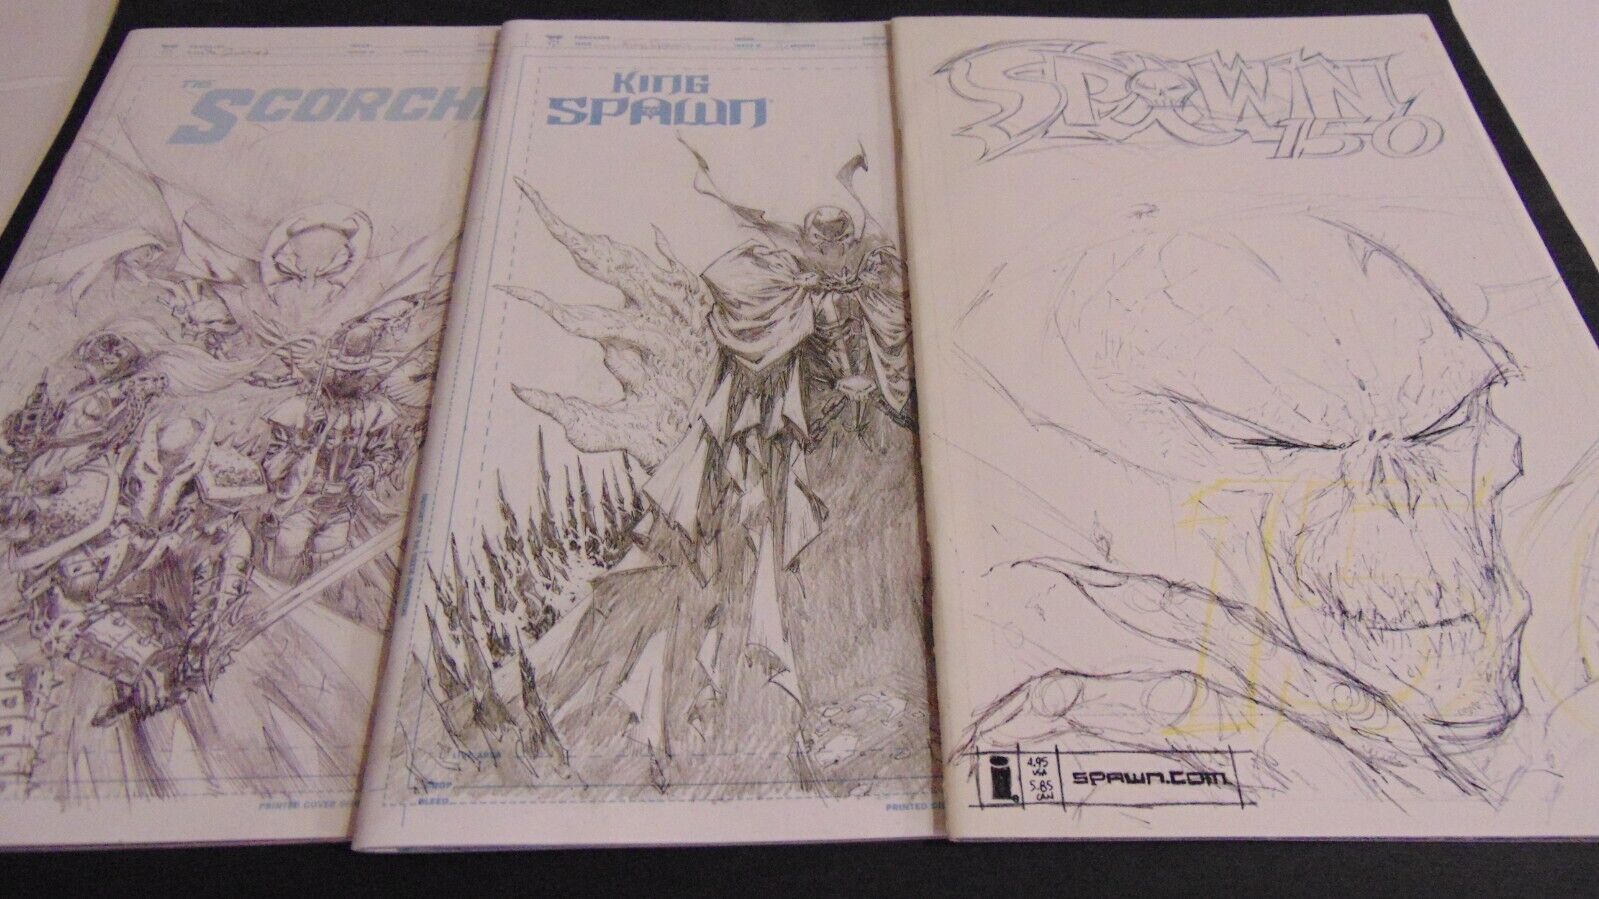 SPAWN #150 KING SPAWN # 1 THE SCORCHED #1 SKETCH COVER VARIANT LOT OF 3 LEE HTF